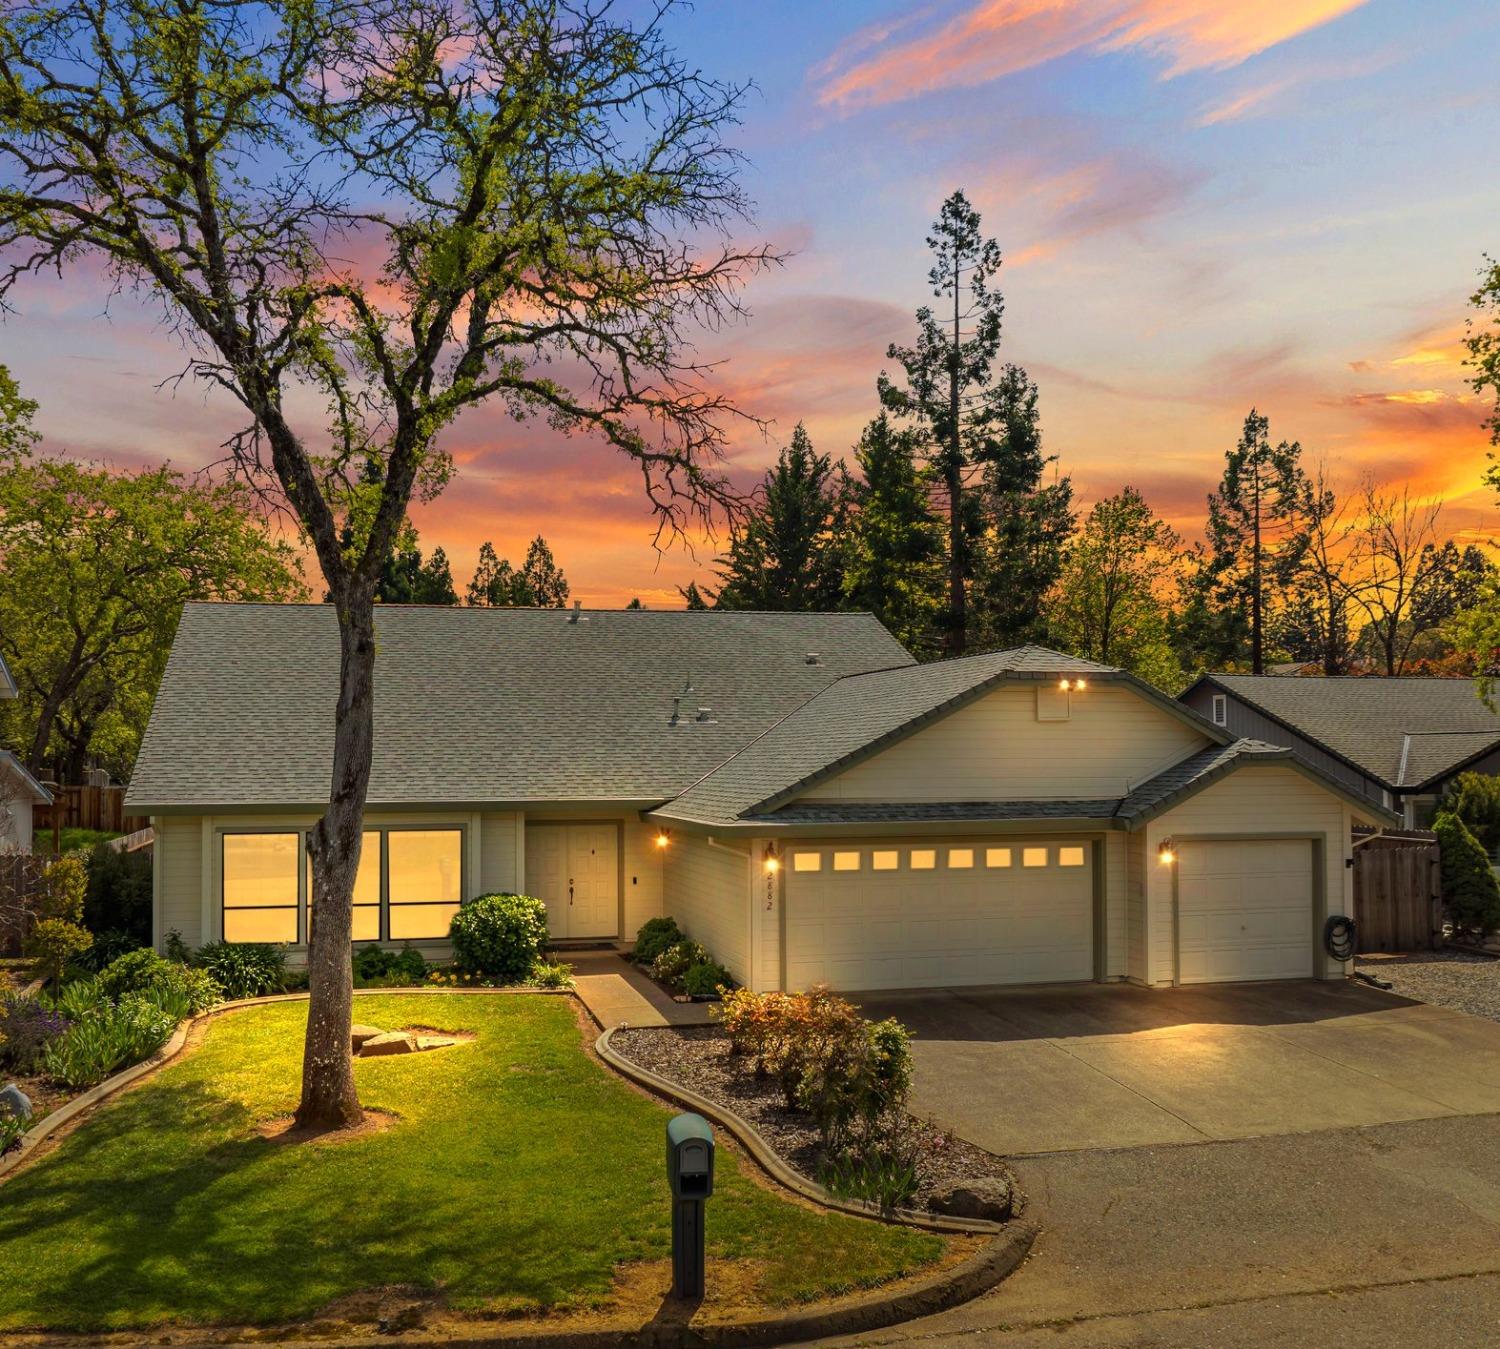 Photo of 2882 Clemson Dr in Cameron Park, CA